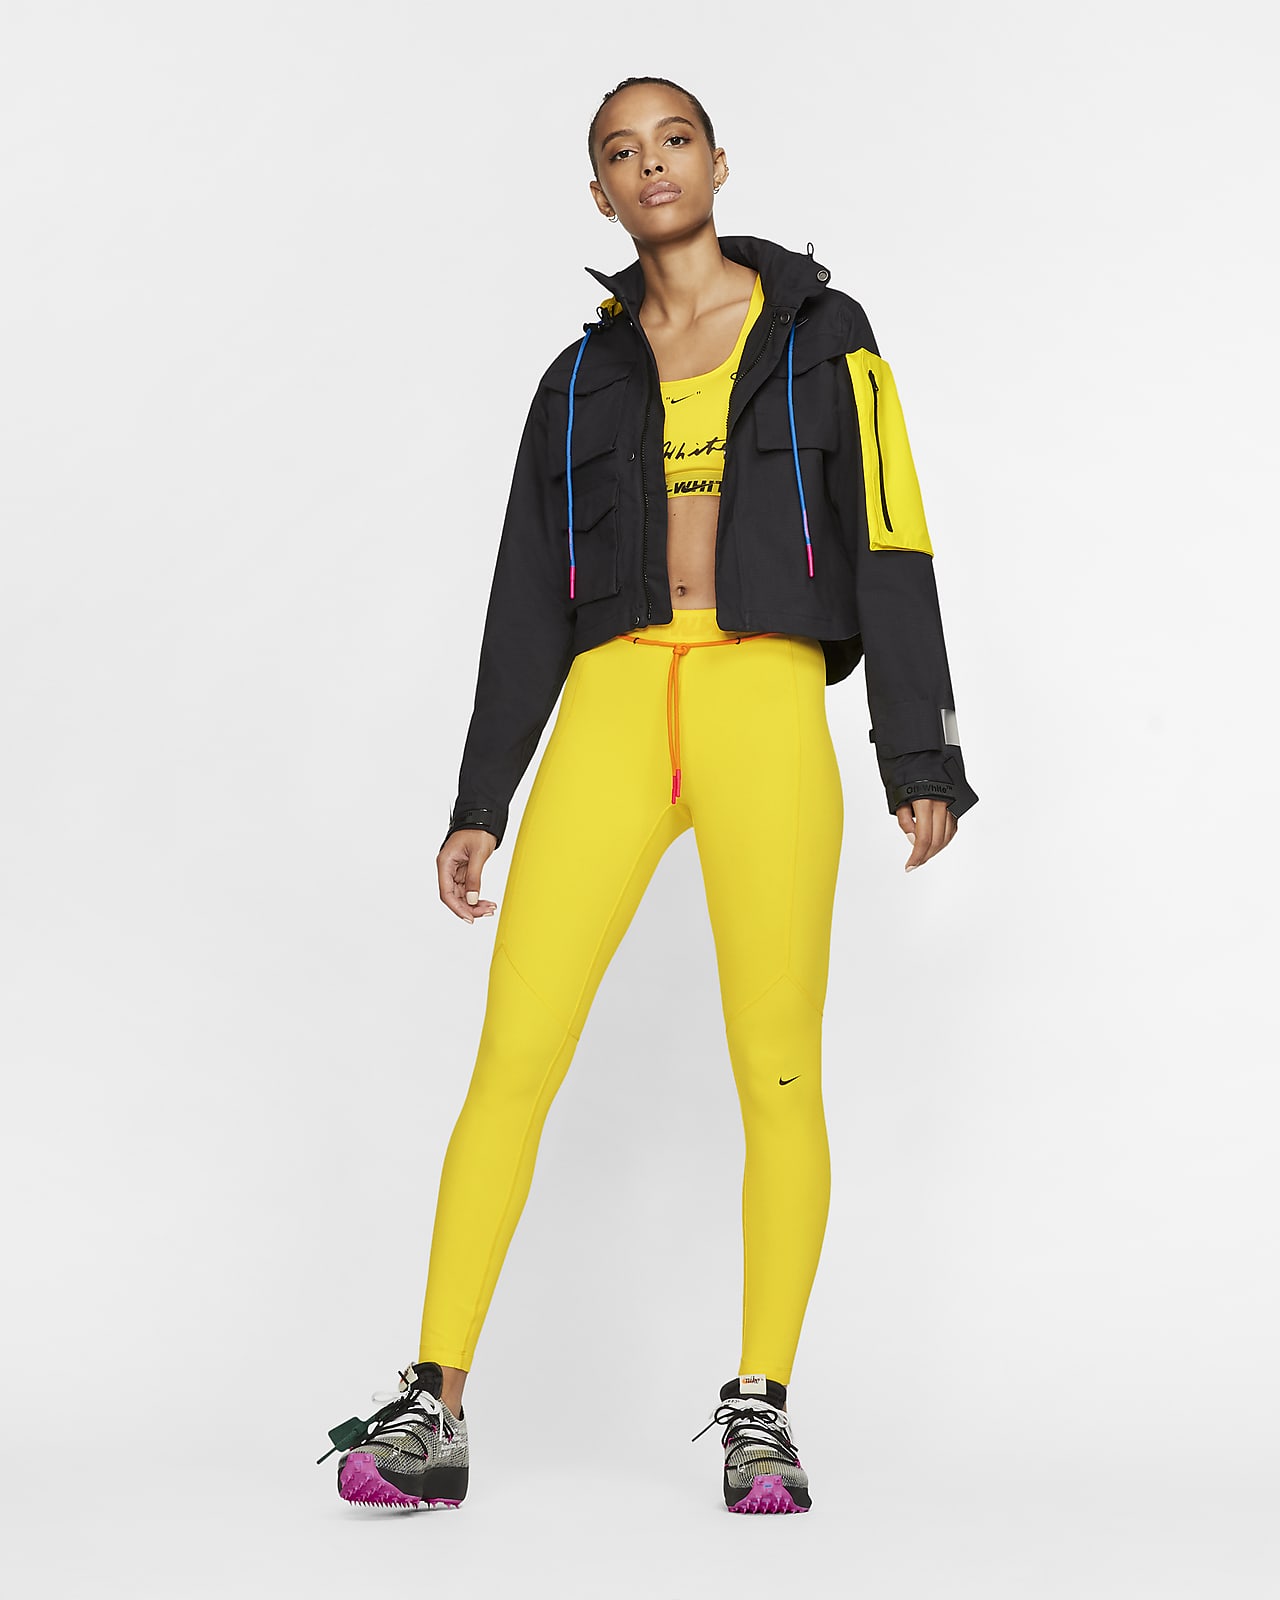 off white nike running tights